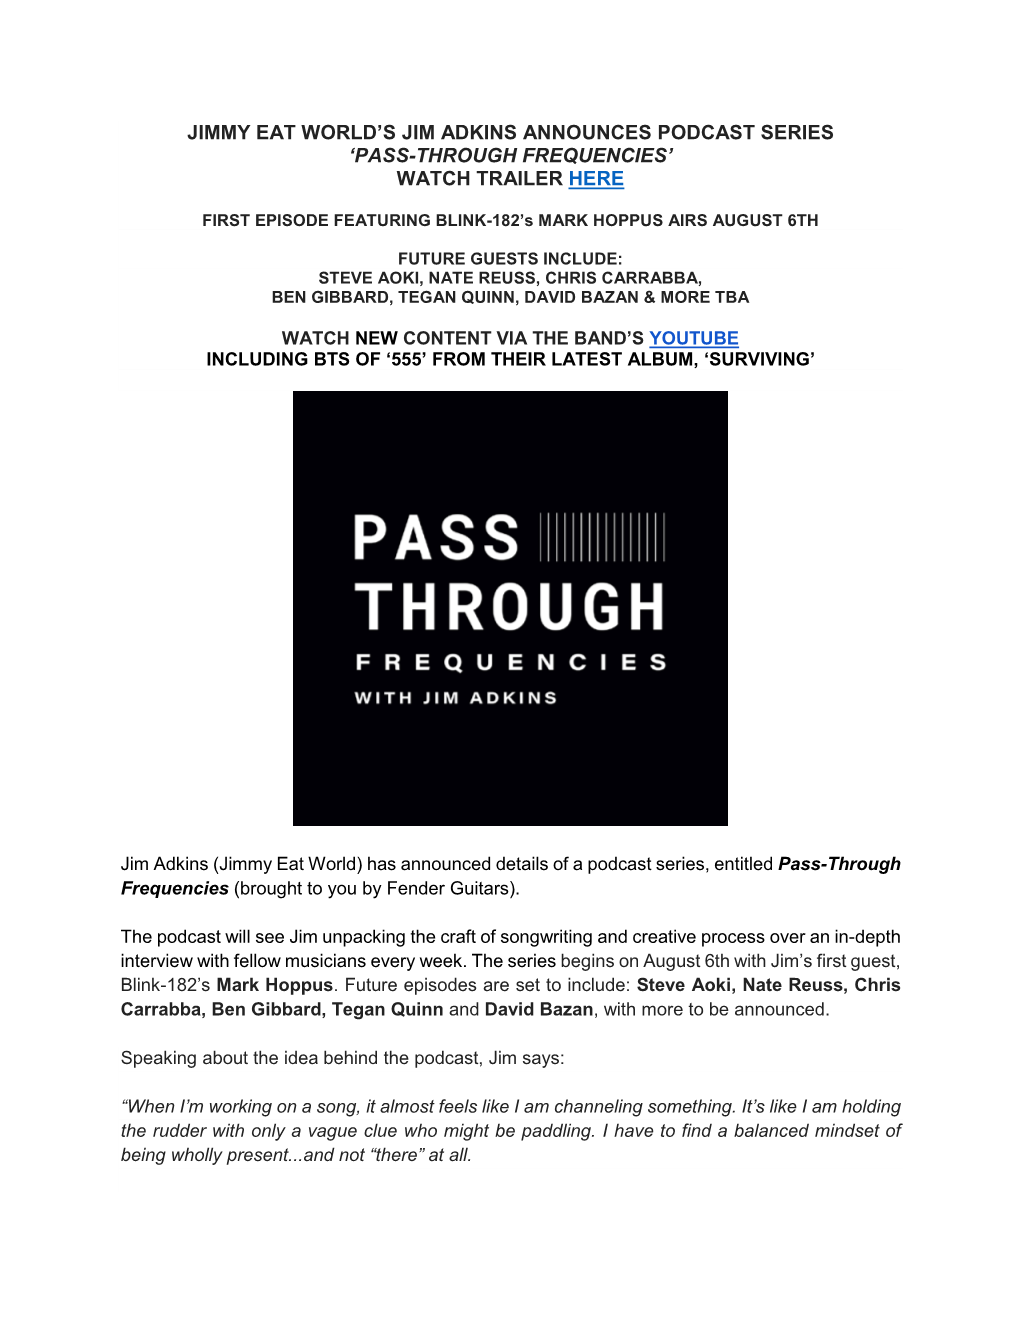 Jimmy Eat World's Jim Adkins Announces Podcast Series 'Pass-Through Frequencies' Watch Trailer Here